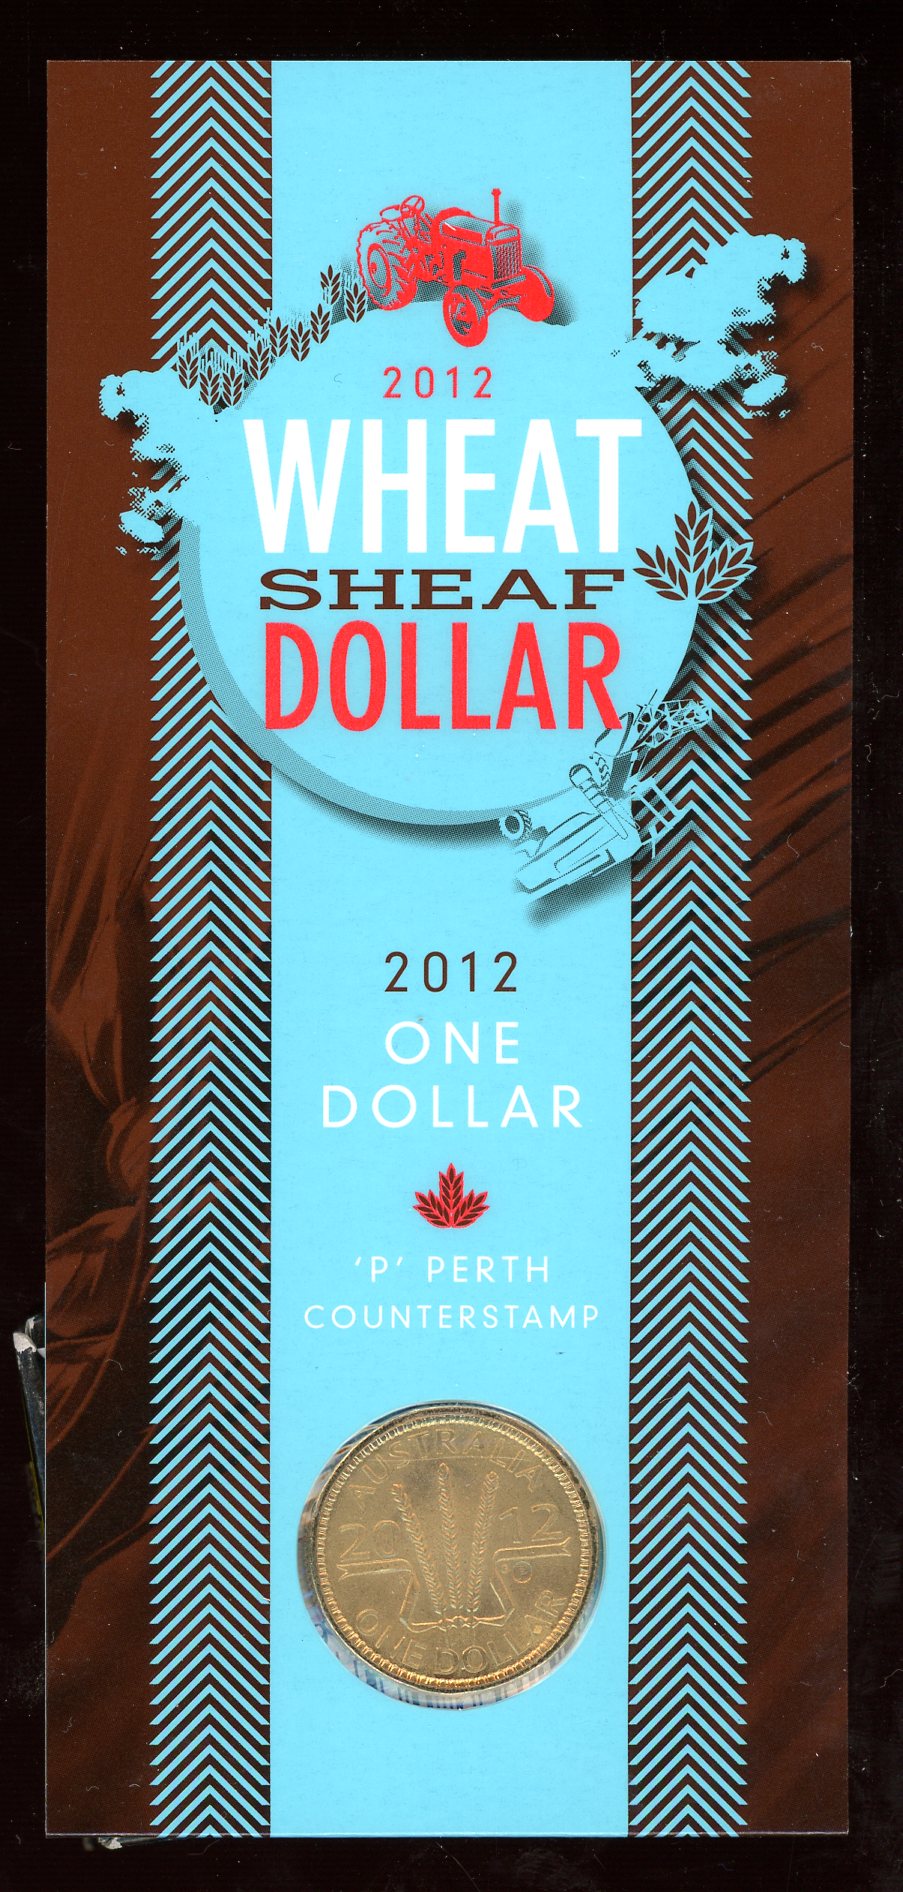 Thumbnail for 2012 Wheat Sheaf Dollar - P Counterstamp